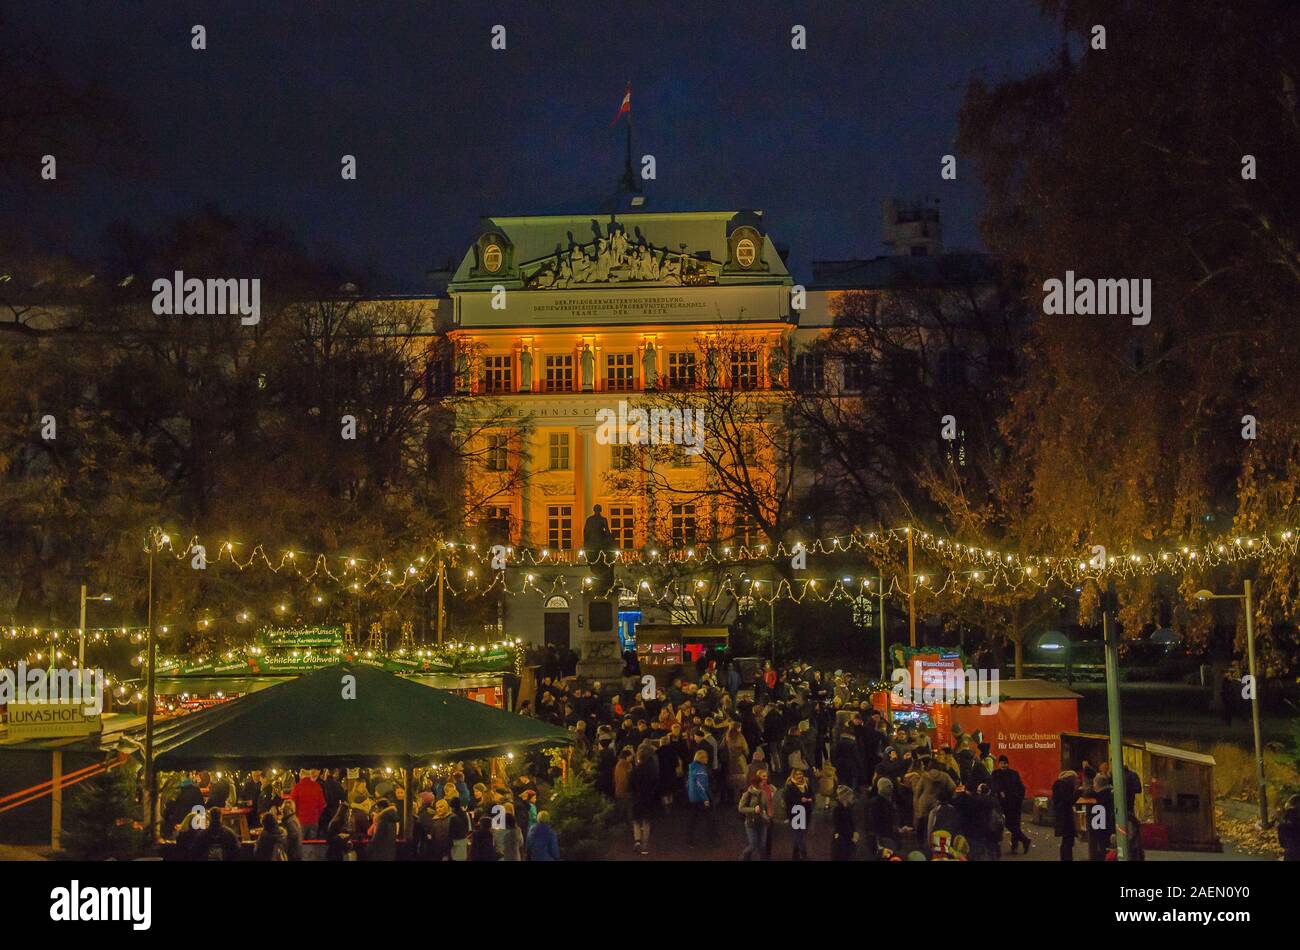 Vienna Christmas markets have great settings. The Karlsplatz version is no exception, nestled in front of Karlskirche and the Technische Universität. Stock Photo